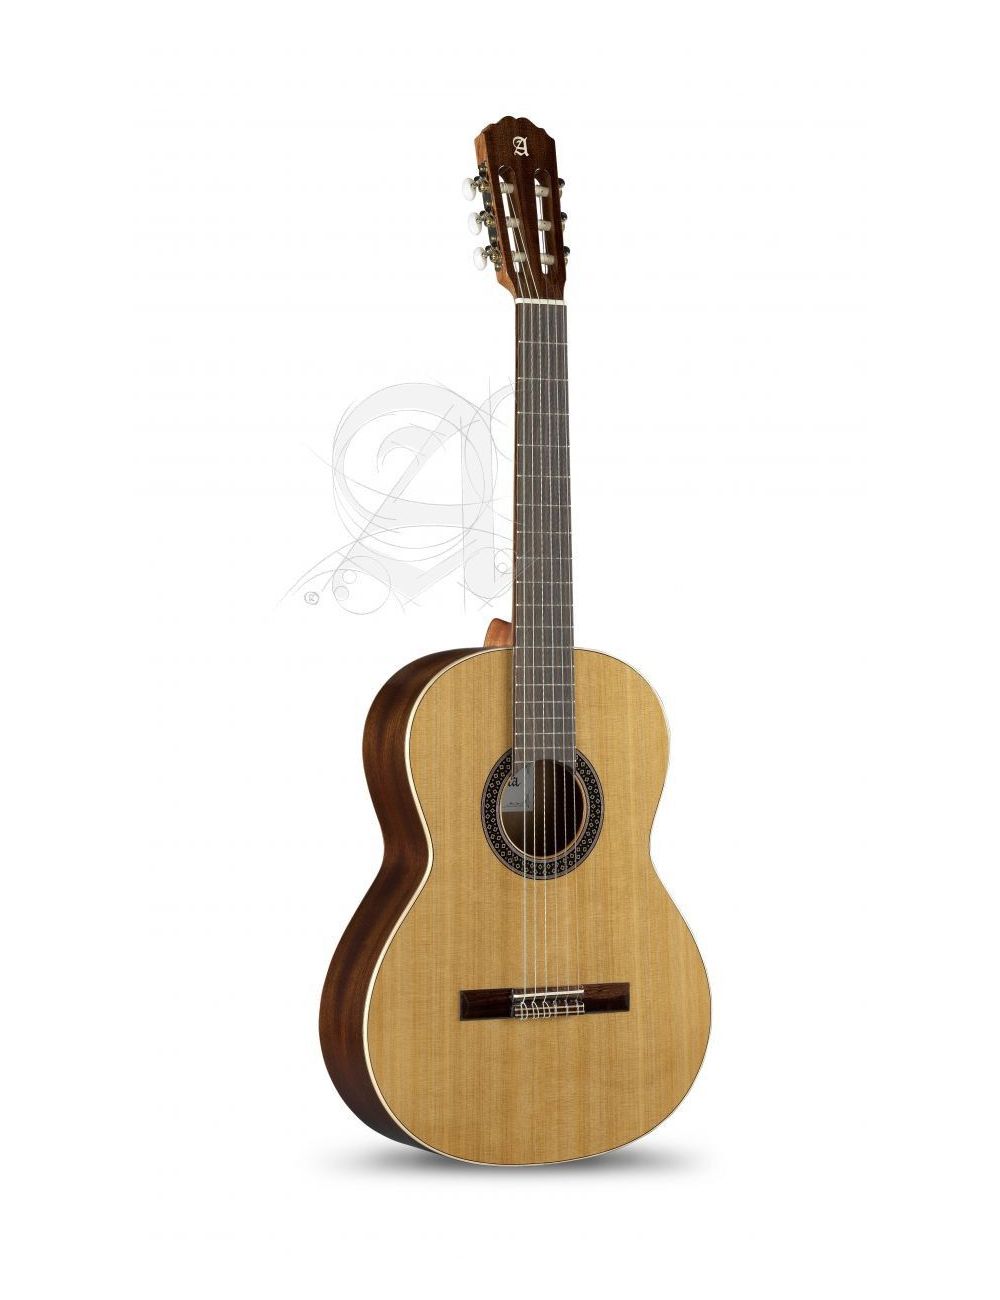 Alhambra 1C HT 3/4 Classical Guitar 1C HT 3/4 Special sizes